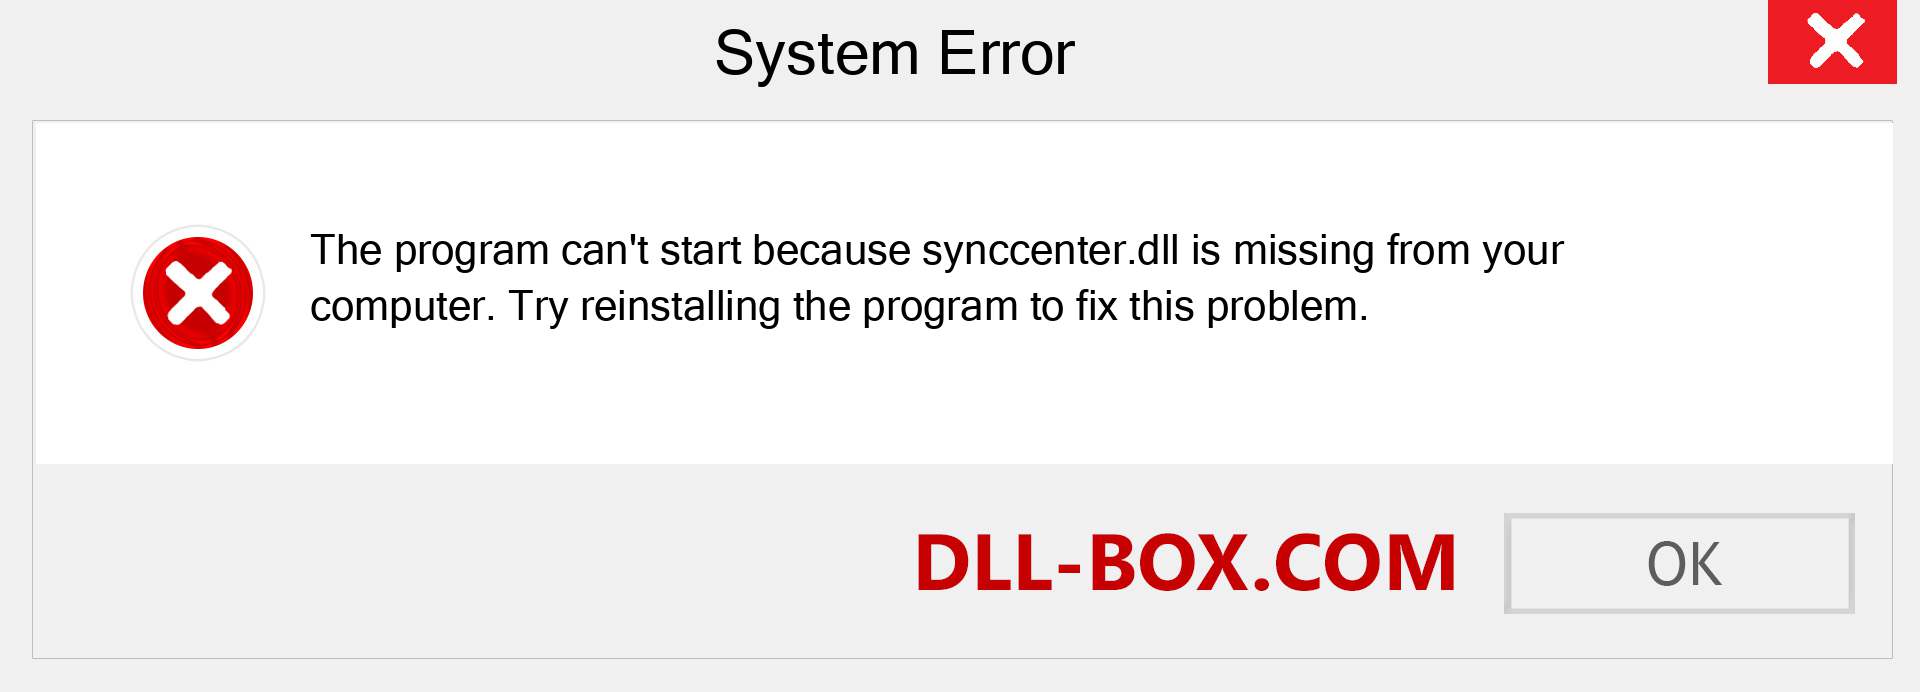  synccenter.dll file is missing?. Download for Windows 7, 8, 10 - Fix  synccenter dll Missing Error on Windows, photos, images